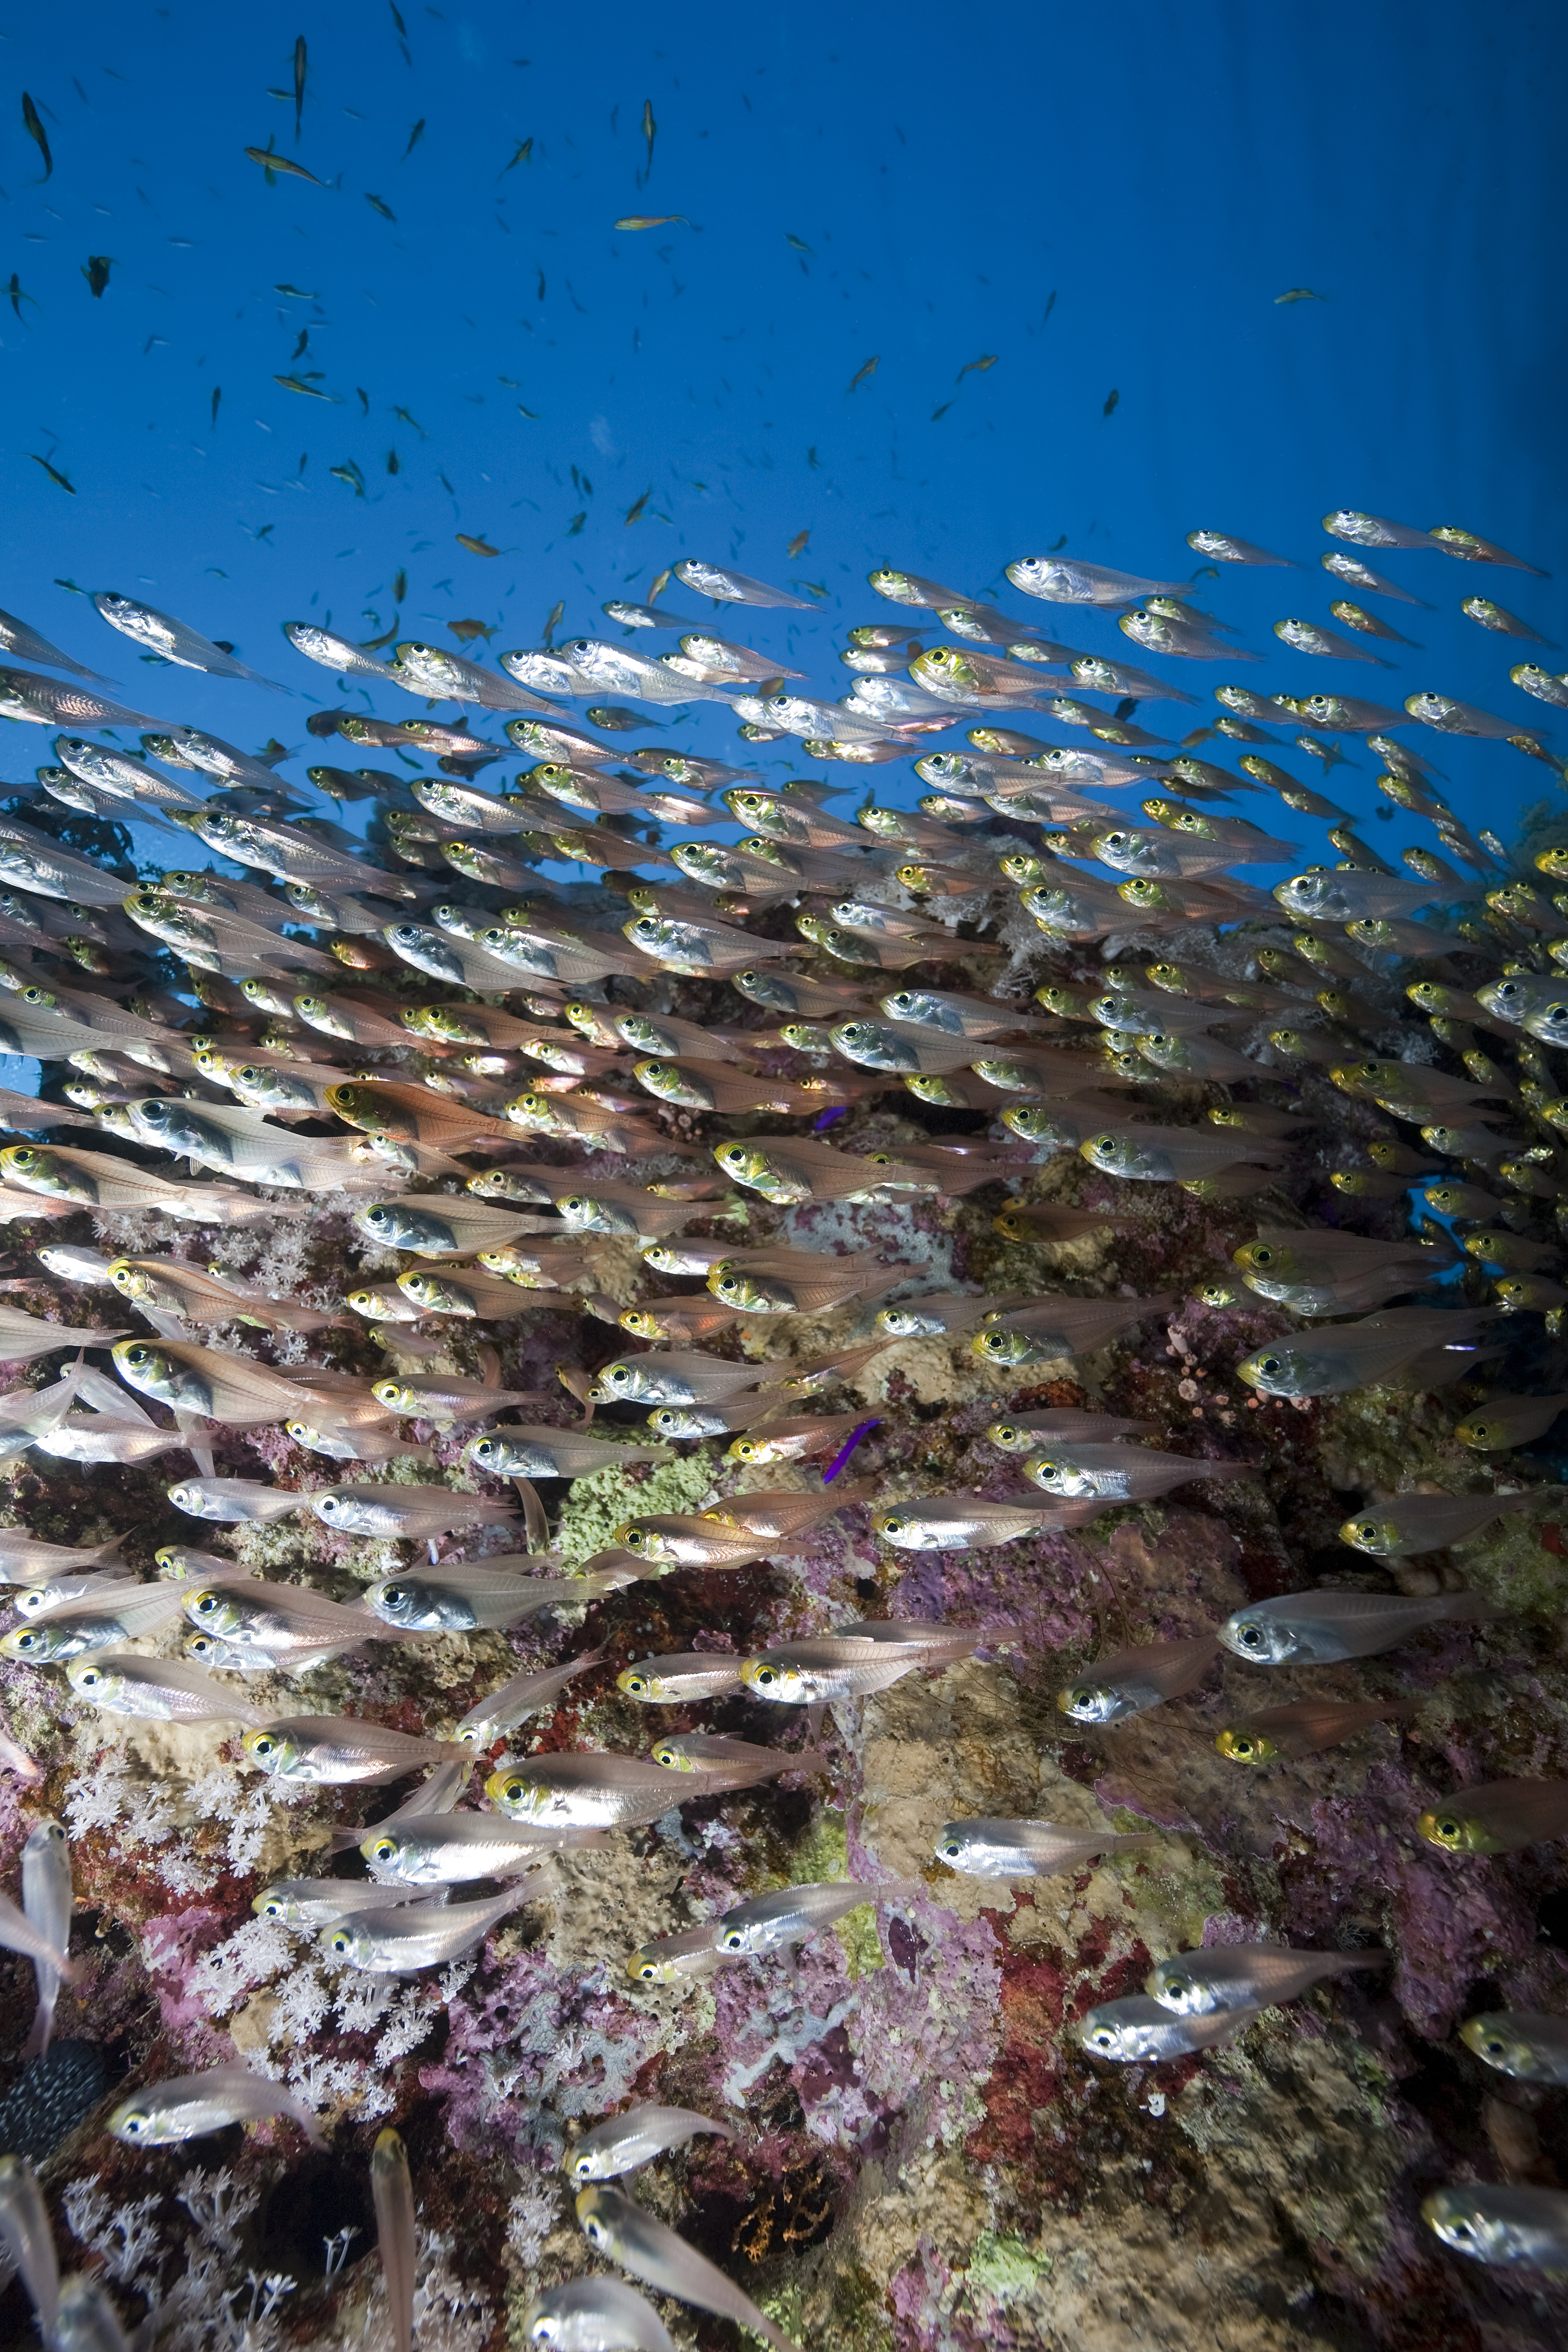 Large school of glassy sweepers swimming around the Big Tunnels dive site in Grand Cayman